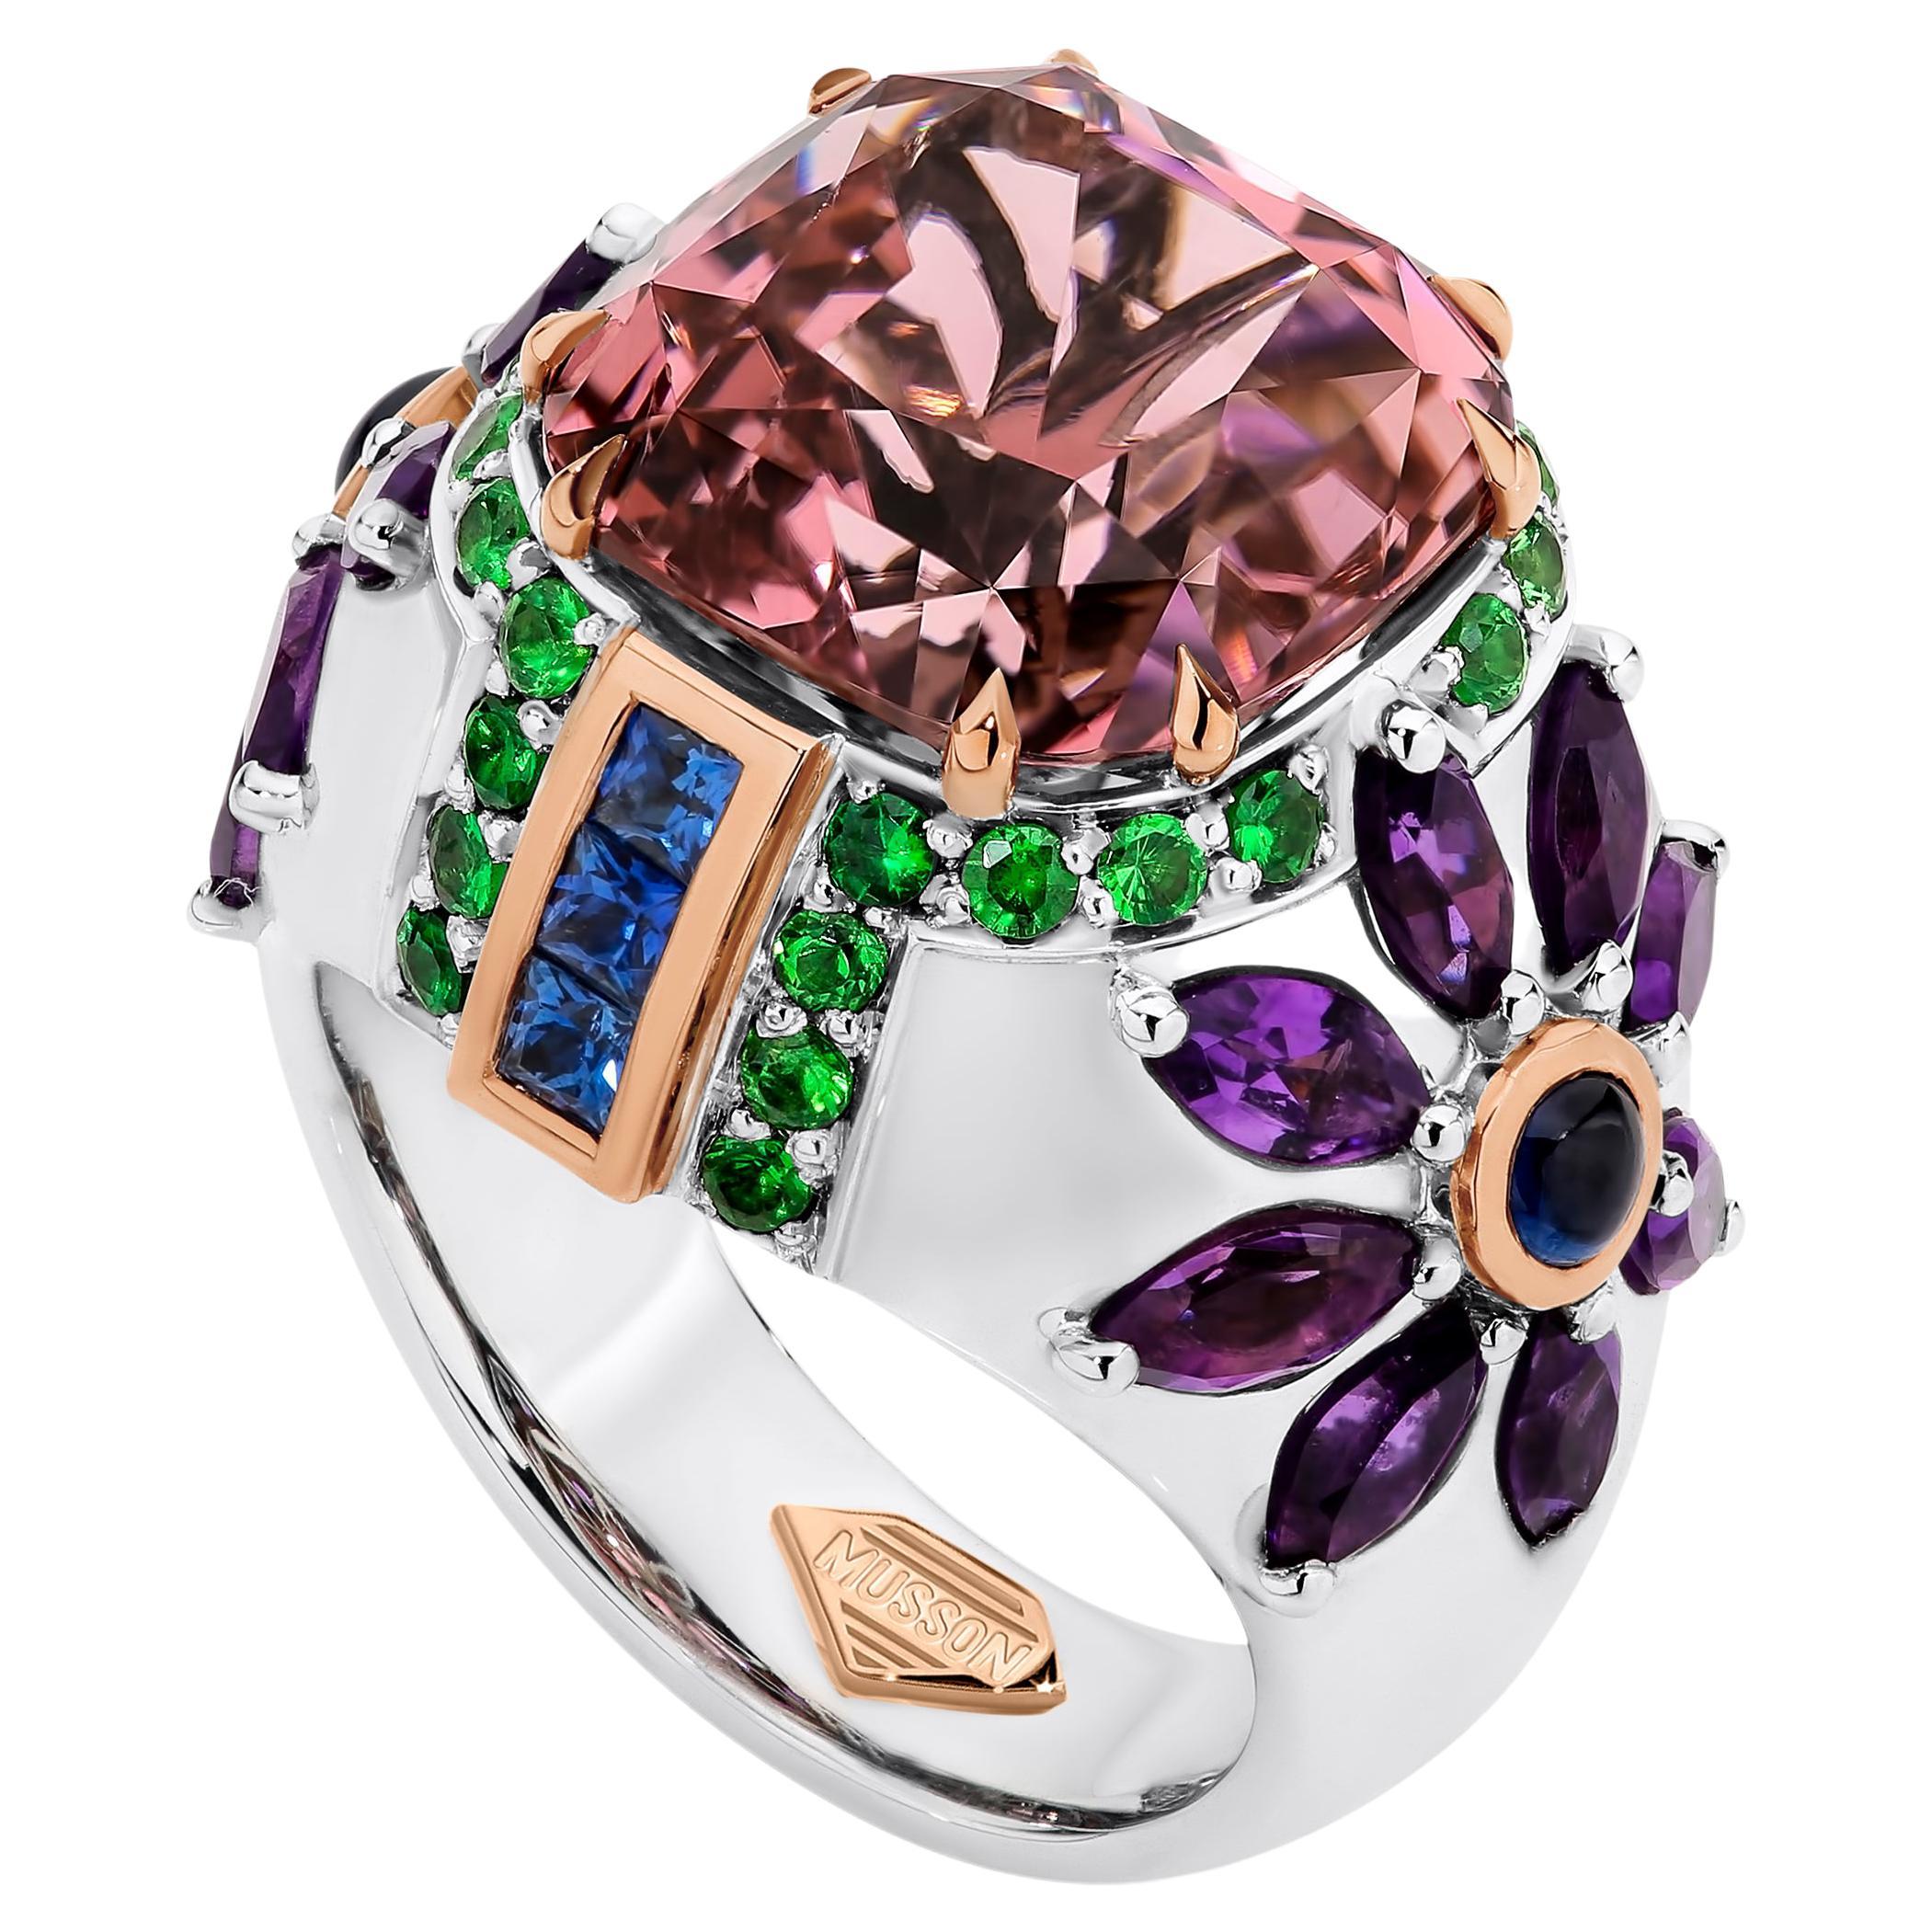 10.51ct Tourmaline Cocktail Ring with Garnets, Sapphires & Amethyst by Musson For Sale